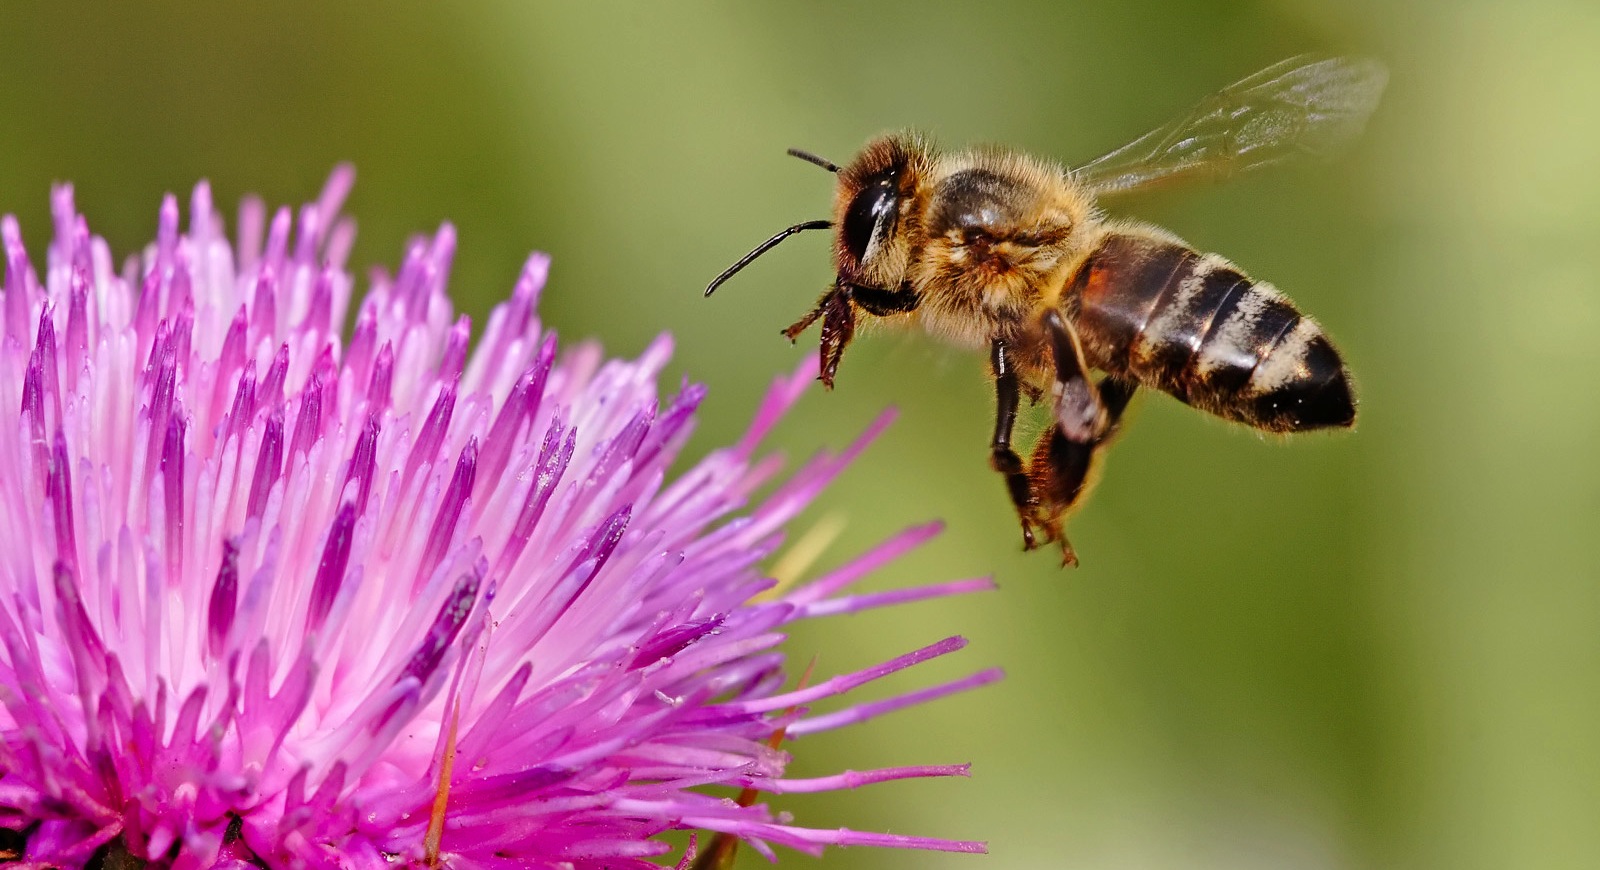 New research has identified the most serious future threats to pollinating species